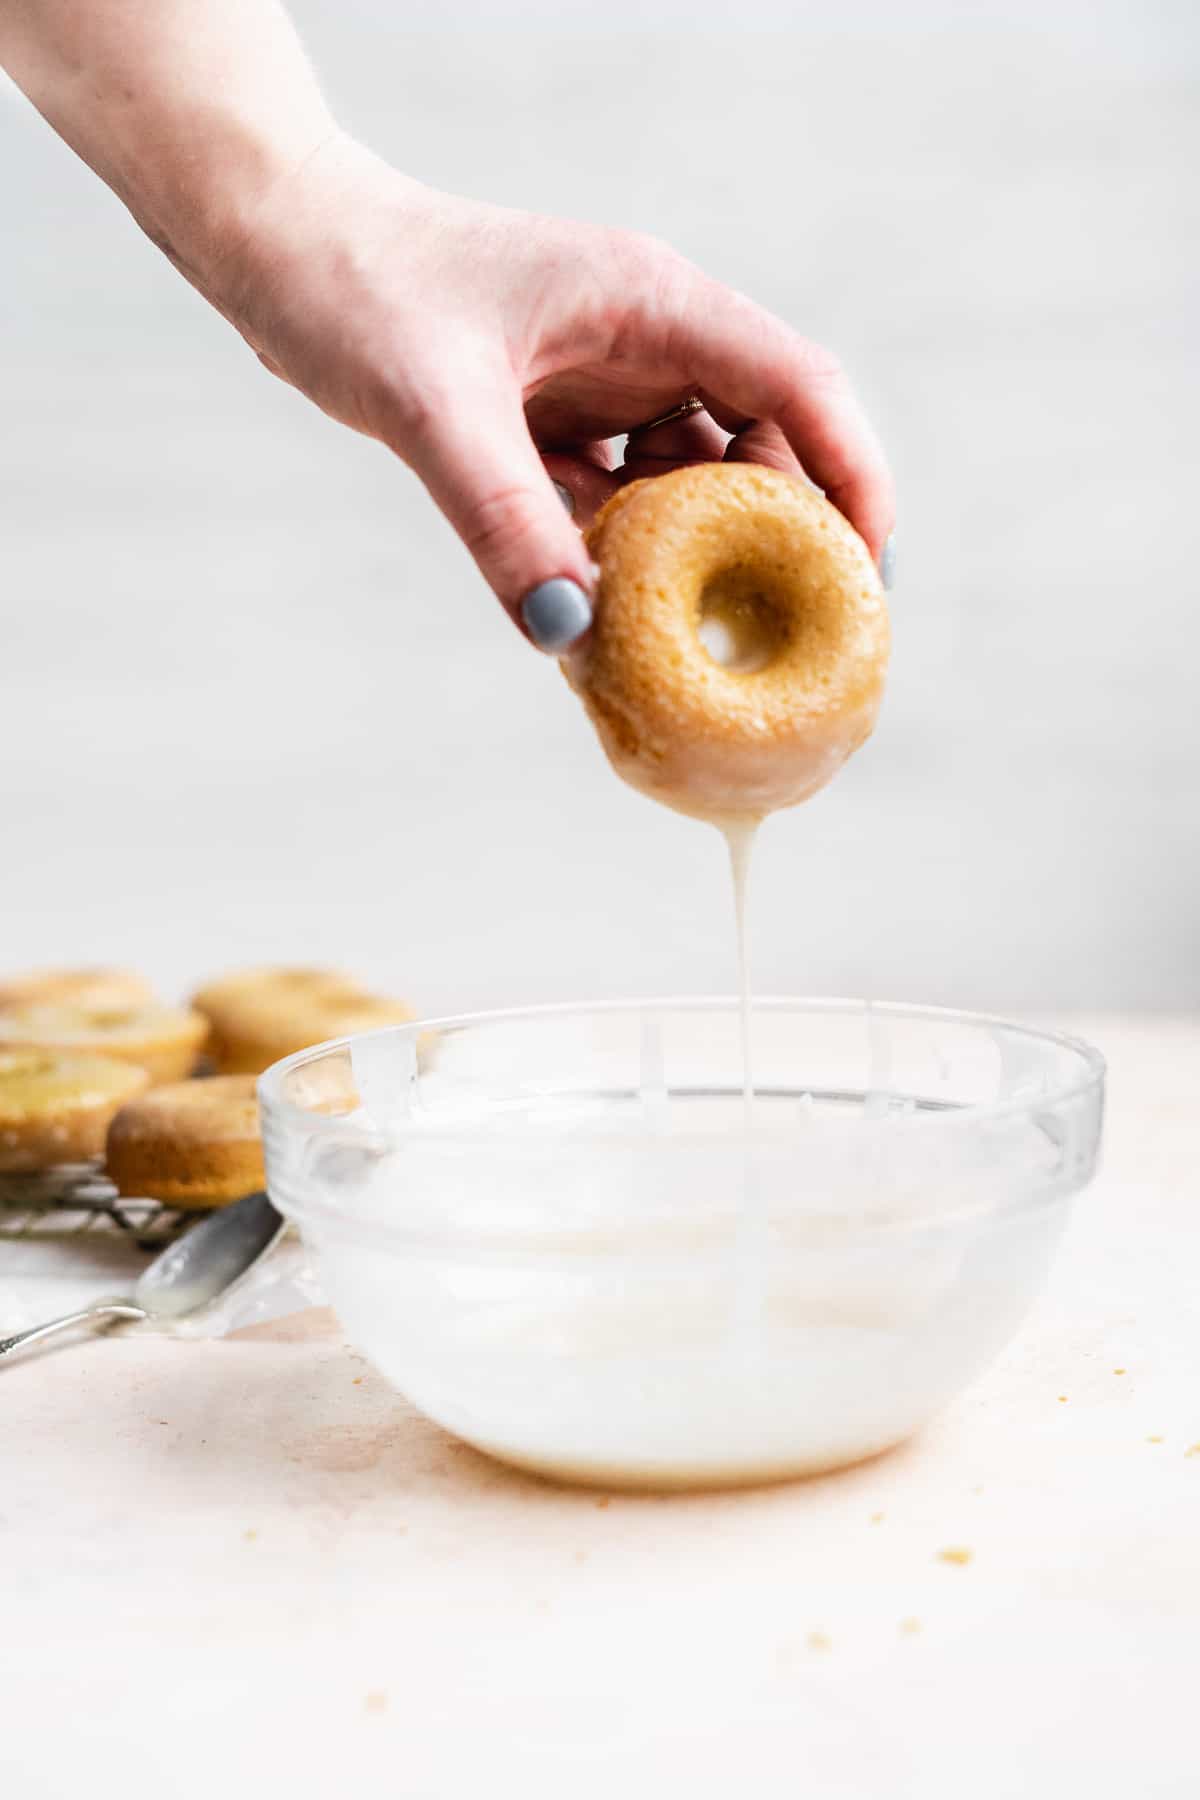 Hand dipping donut in vanilla glaze and letting it drip off.